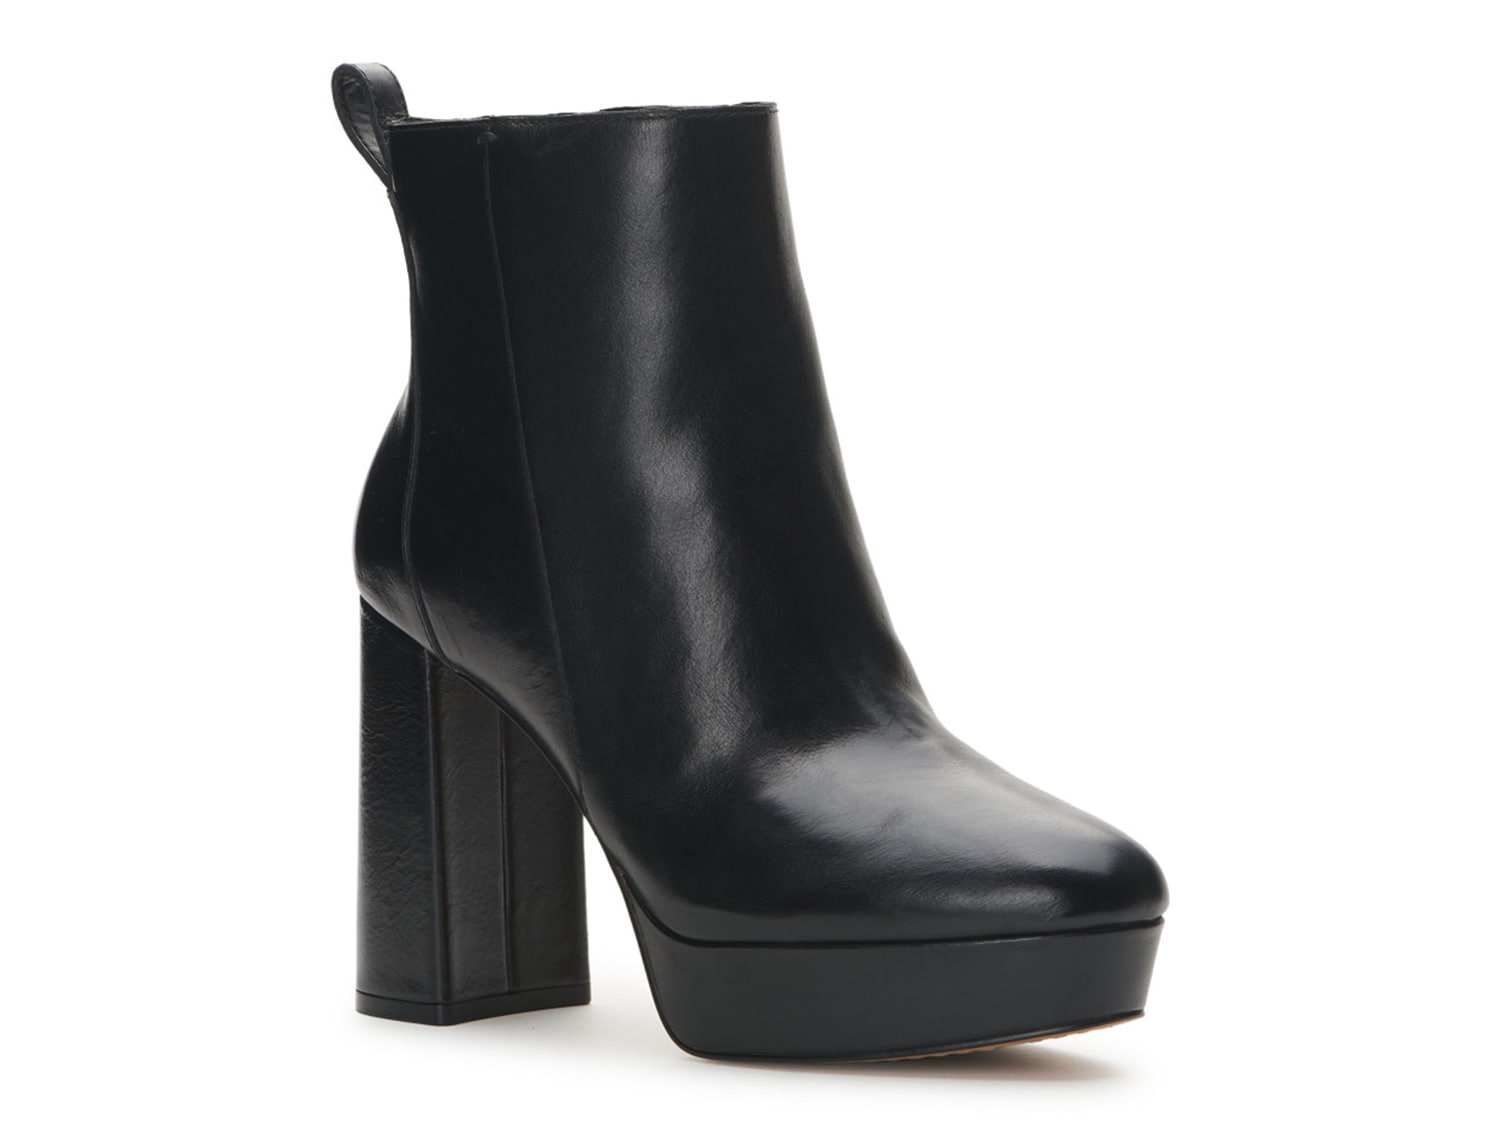 Vince Camuto Gripaula Bootie - Free Shipping | DSW